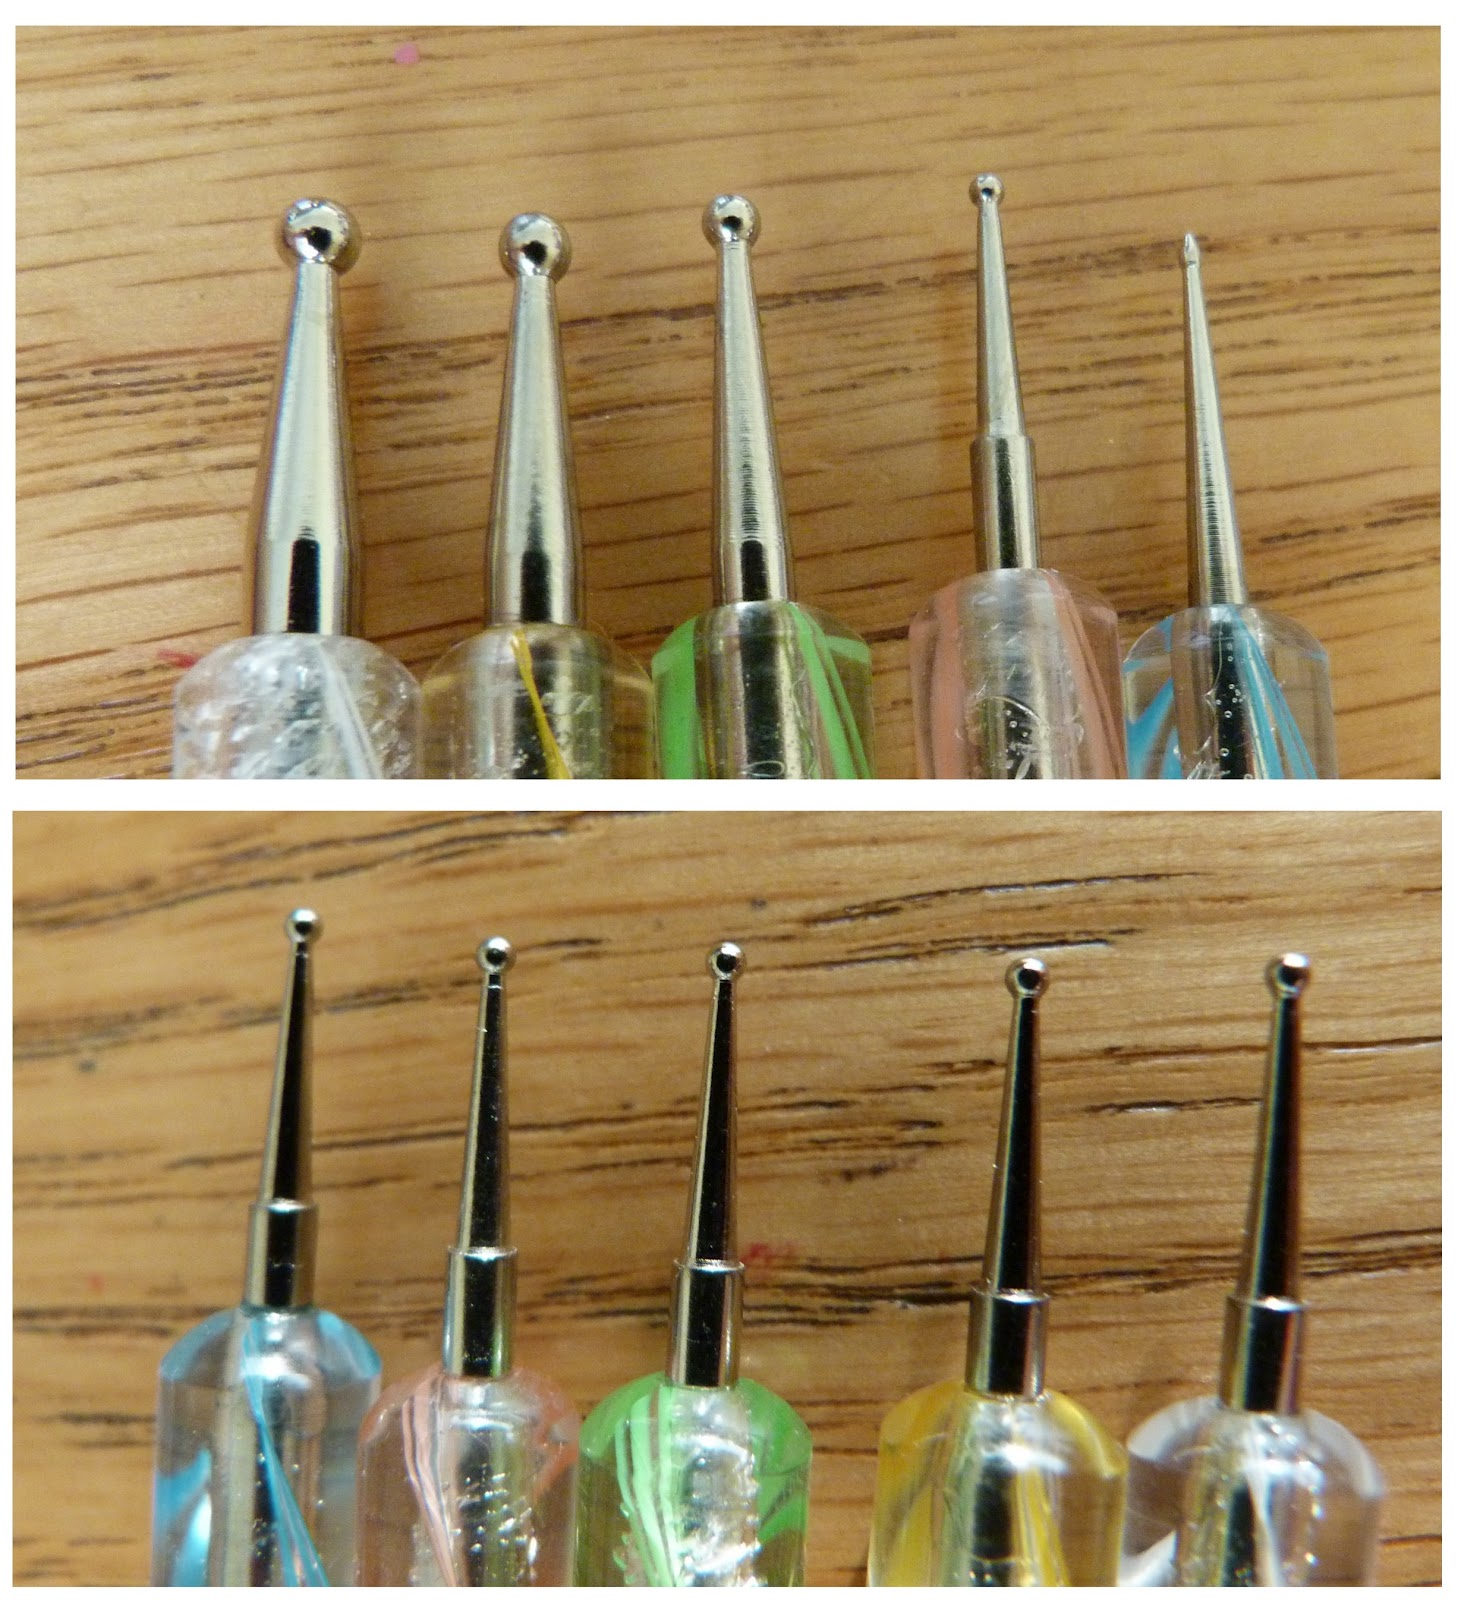 Check me out, I have nail art equipment... well, dotting tools